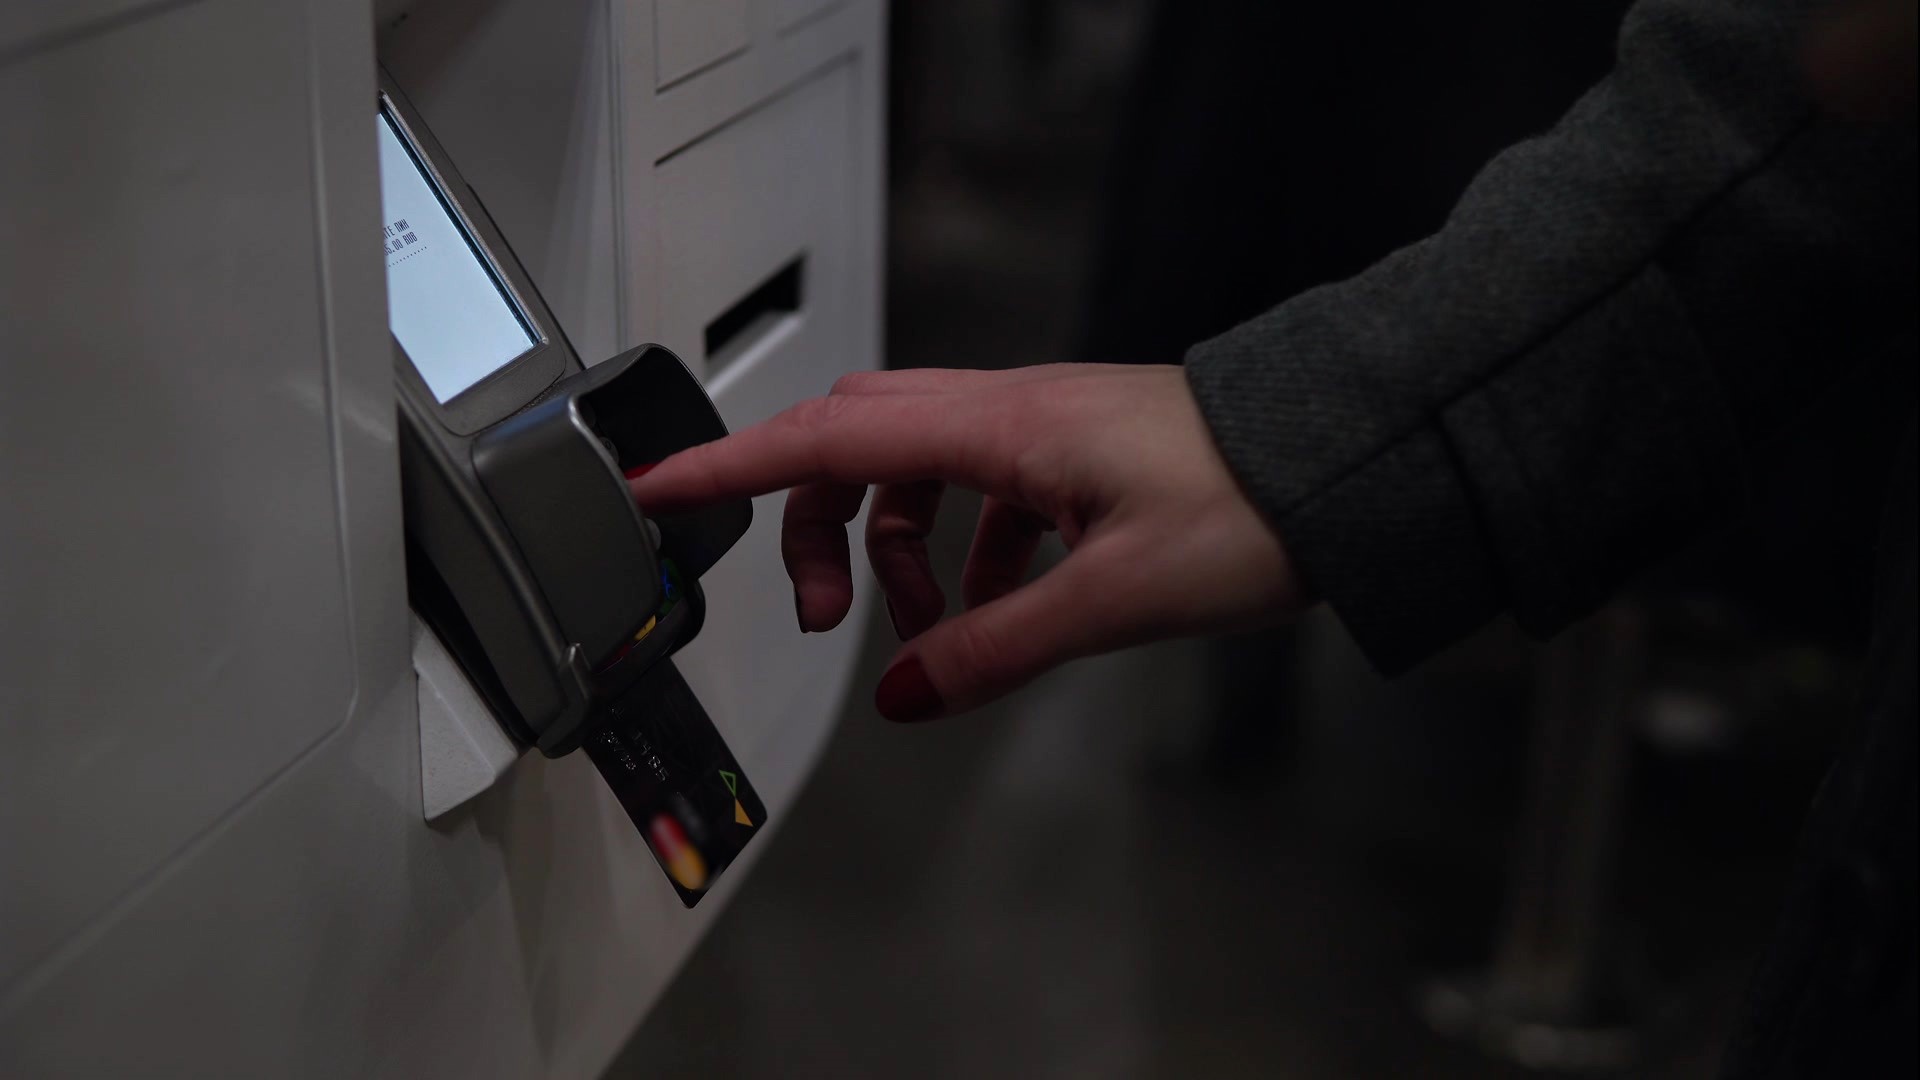 Have you ever had to pay a surcharge at an ATM? If so, you may be owed money.